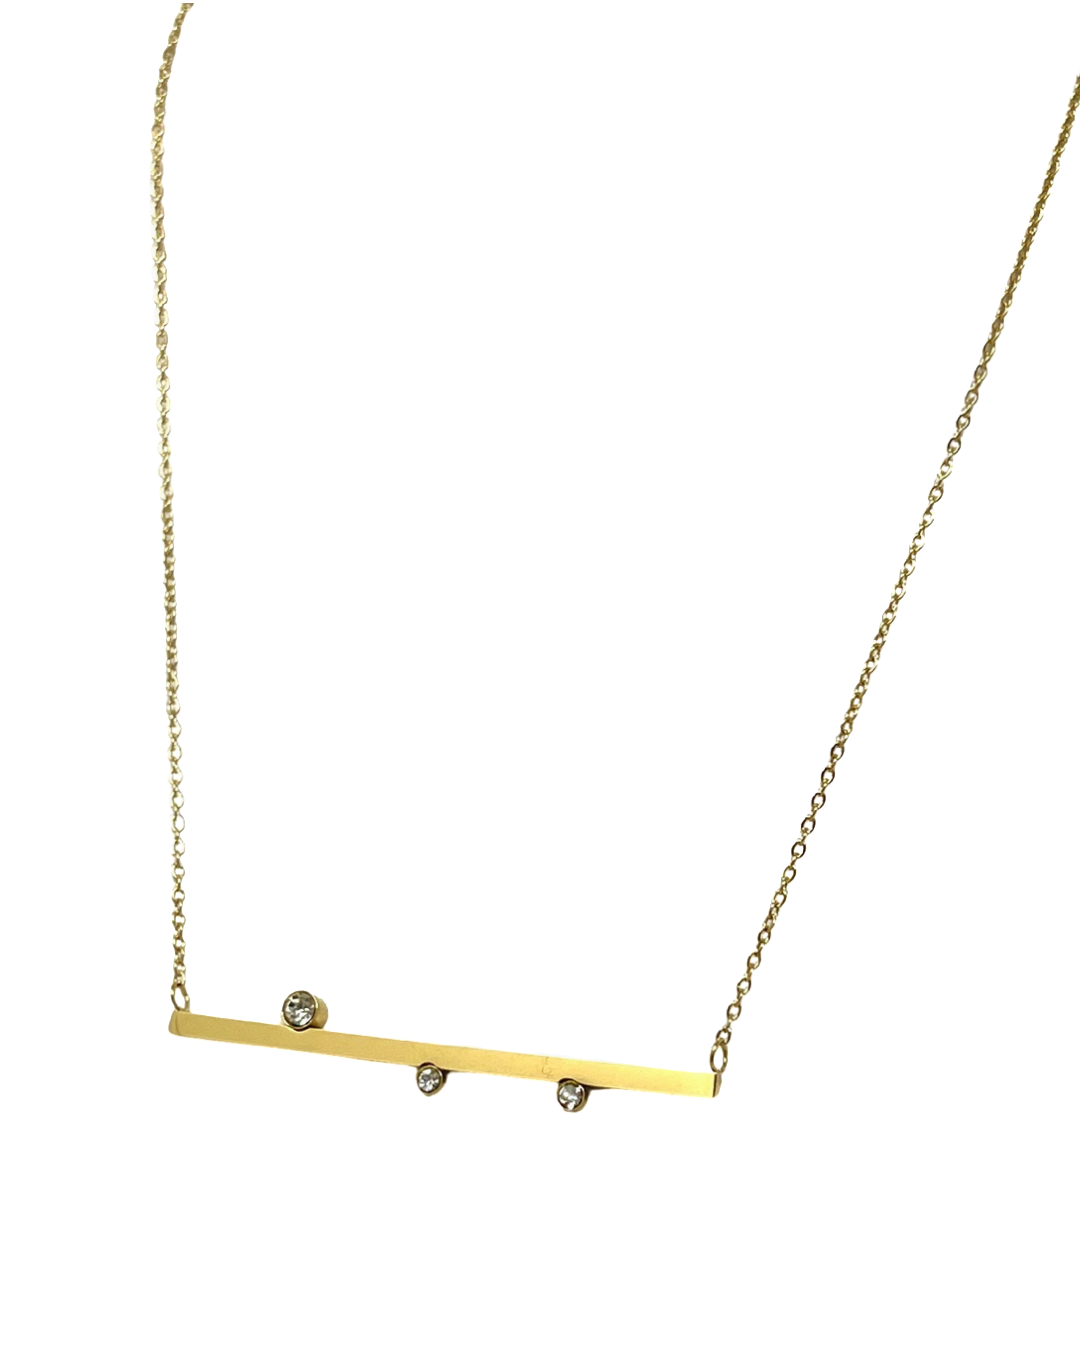 Stationary Bar Necklace in Gold